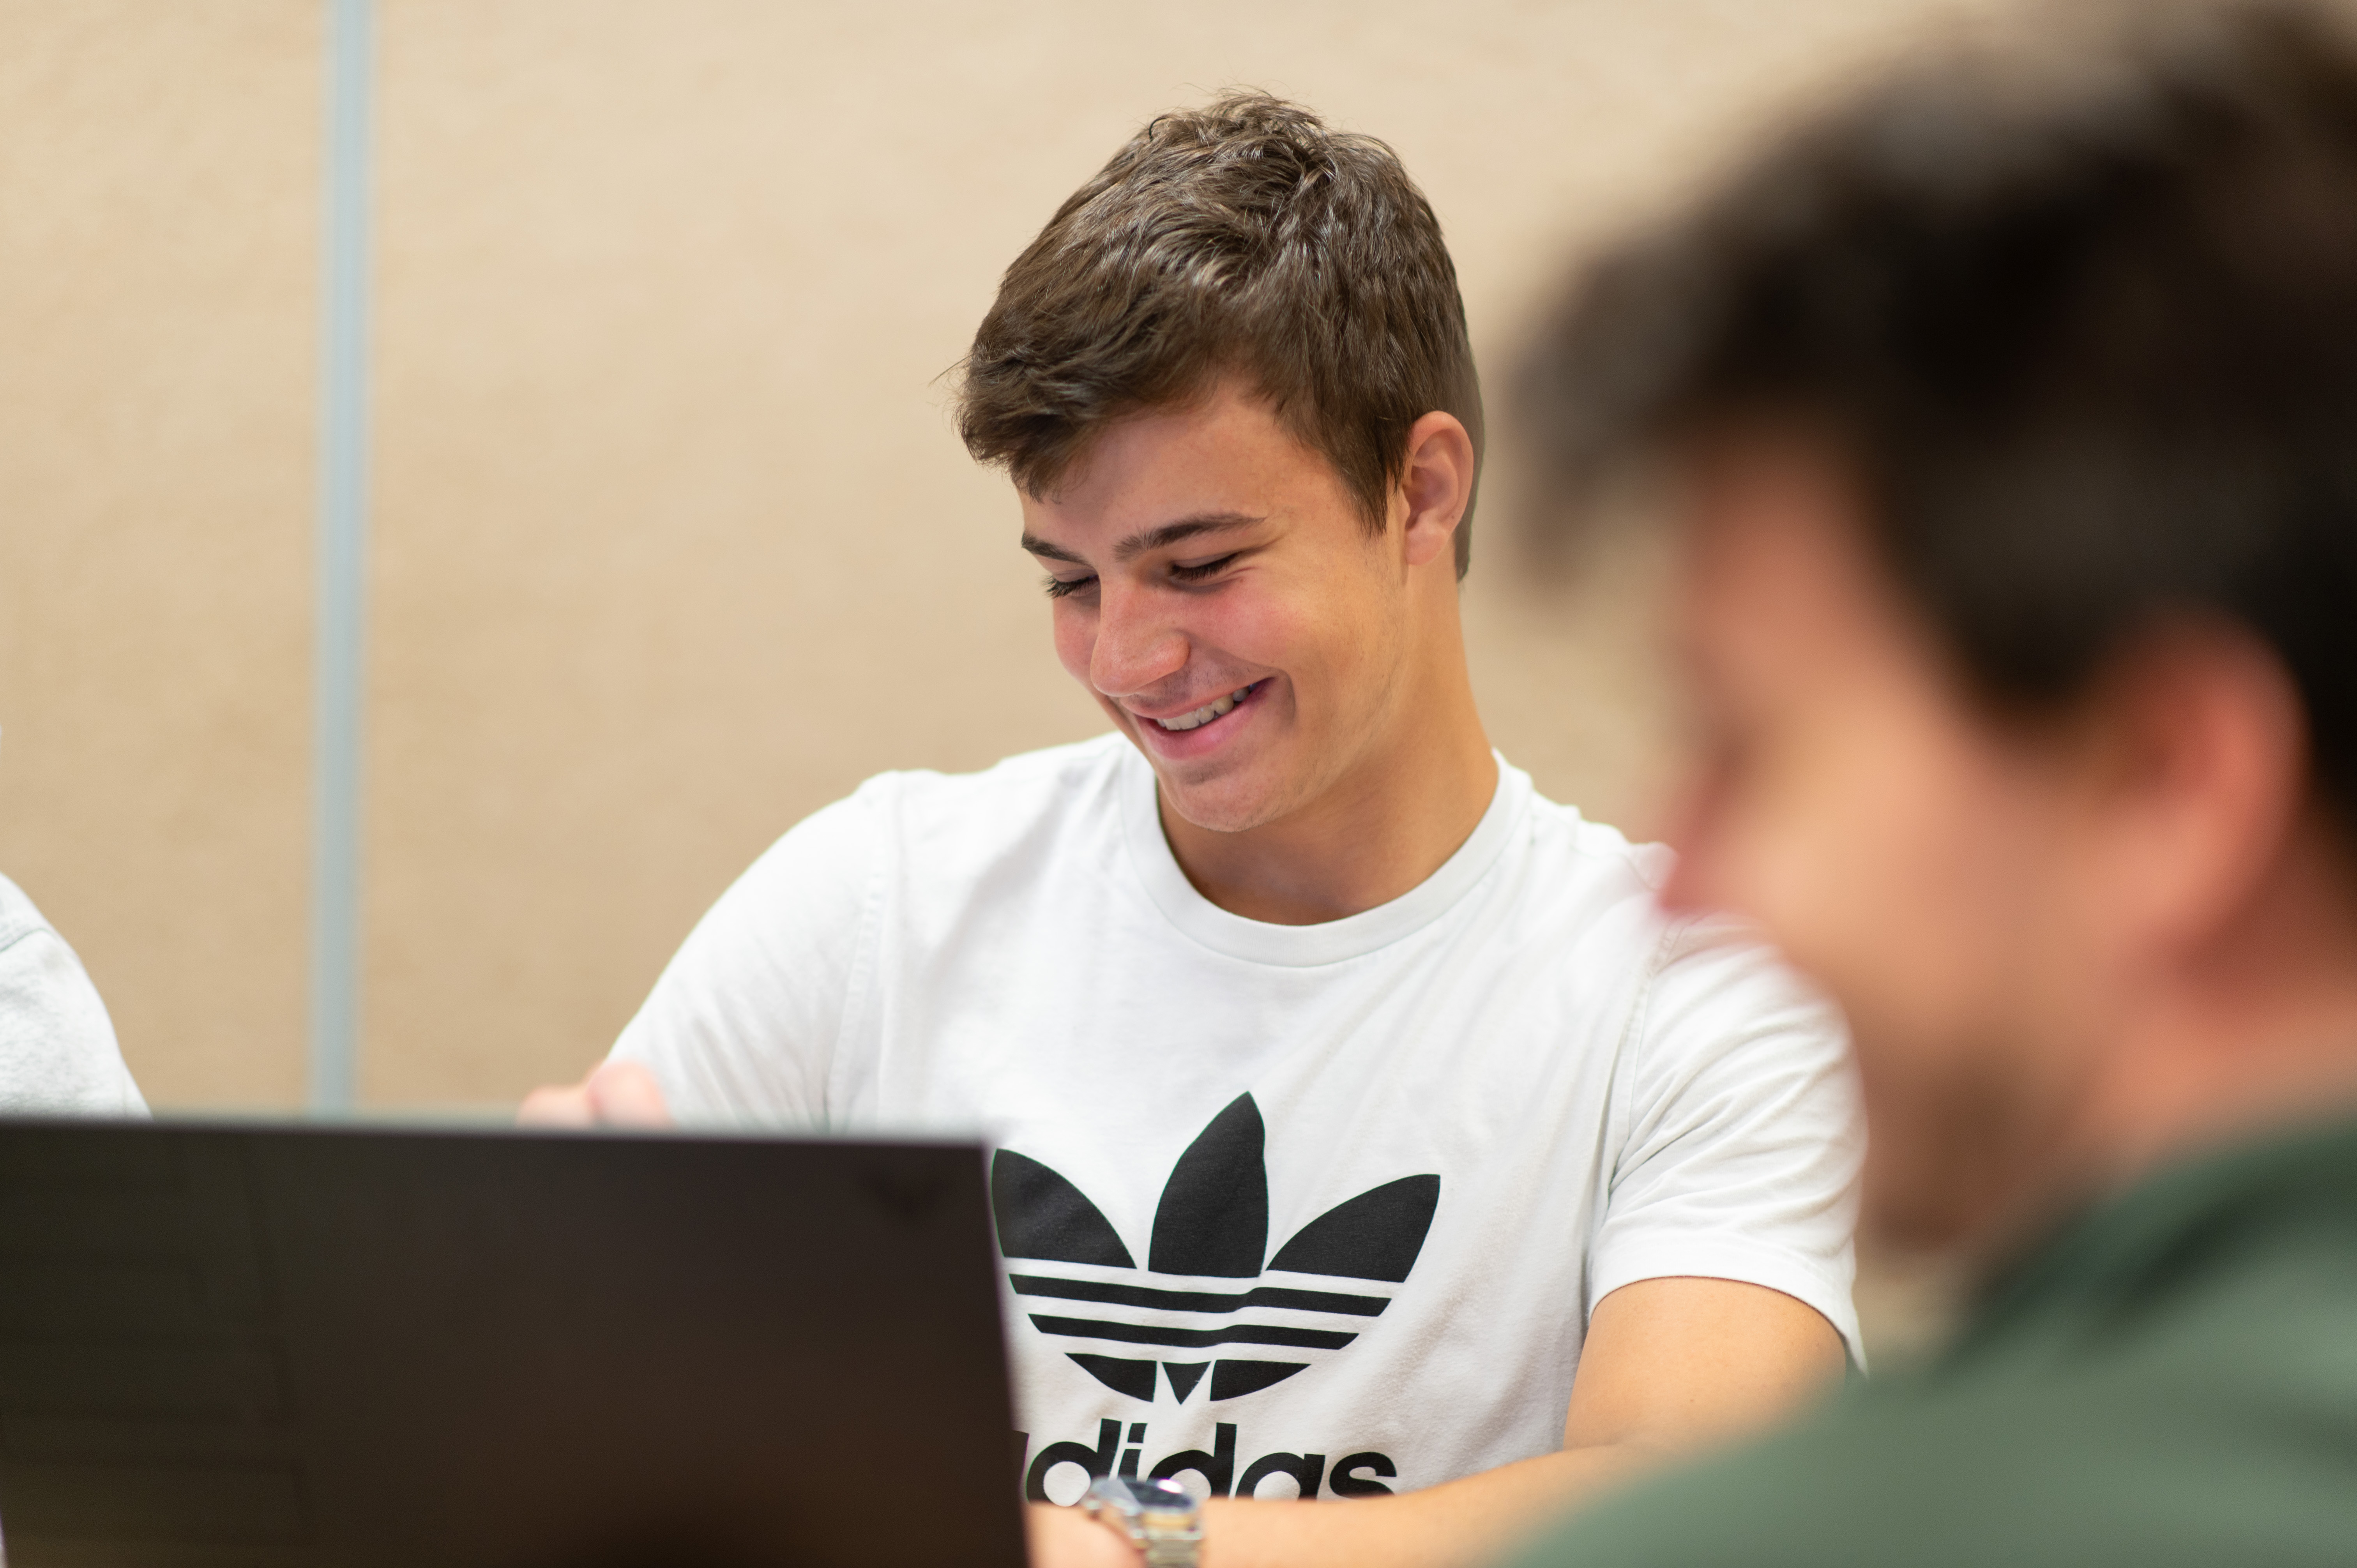 Male student smiles at his computer